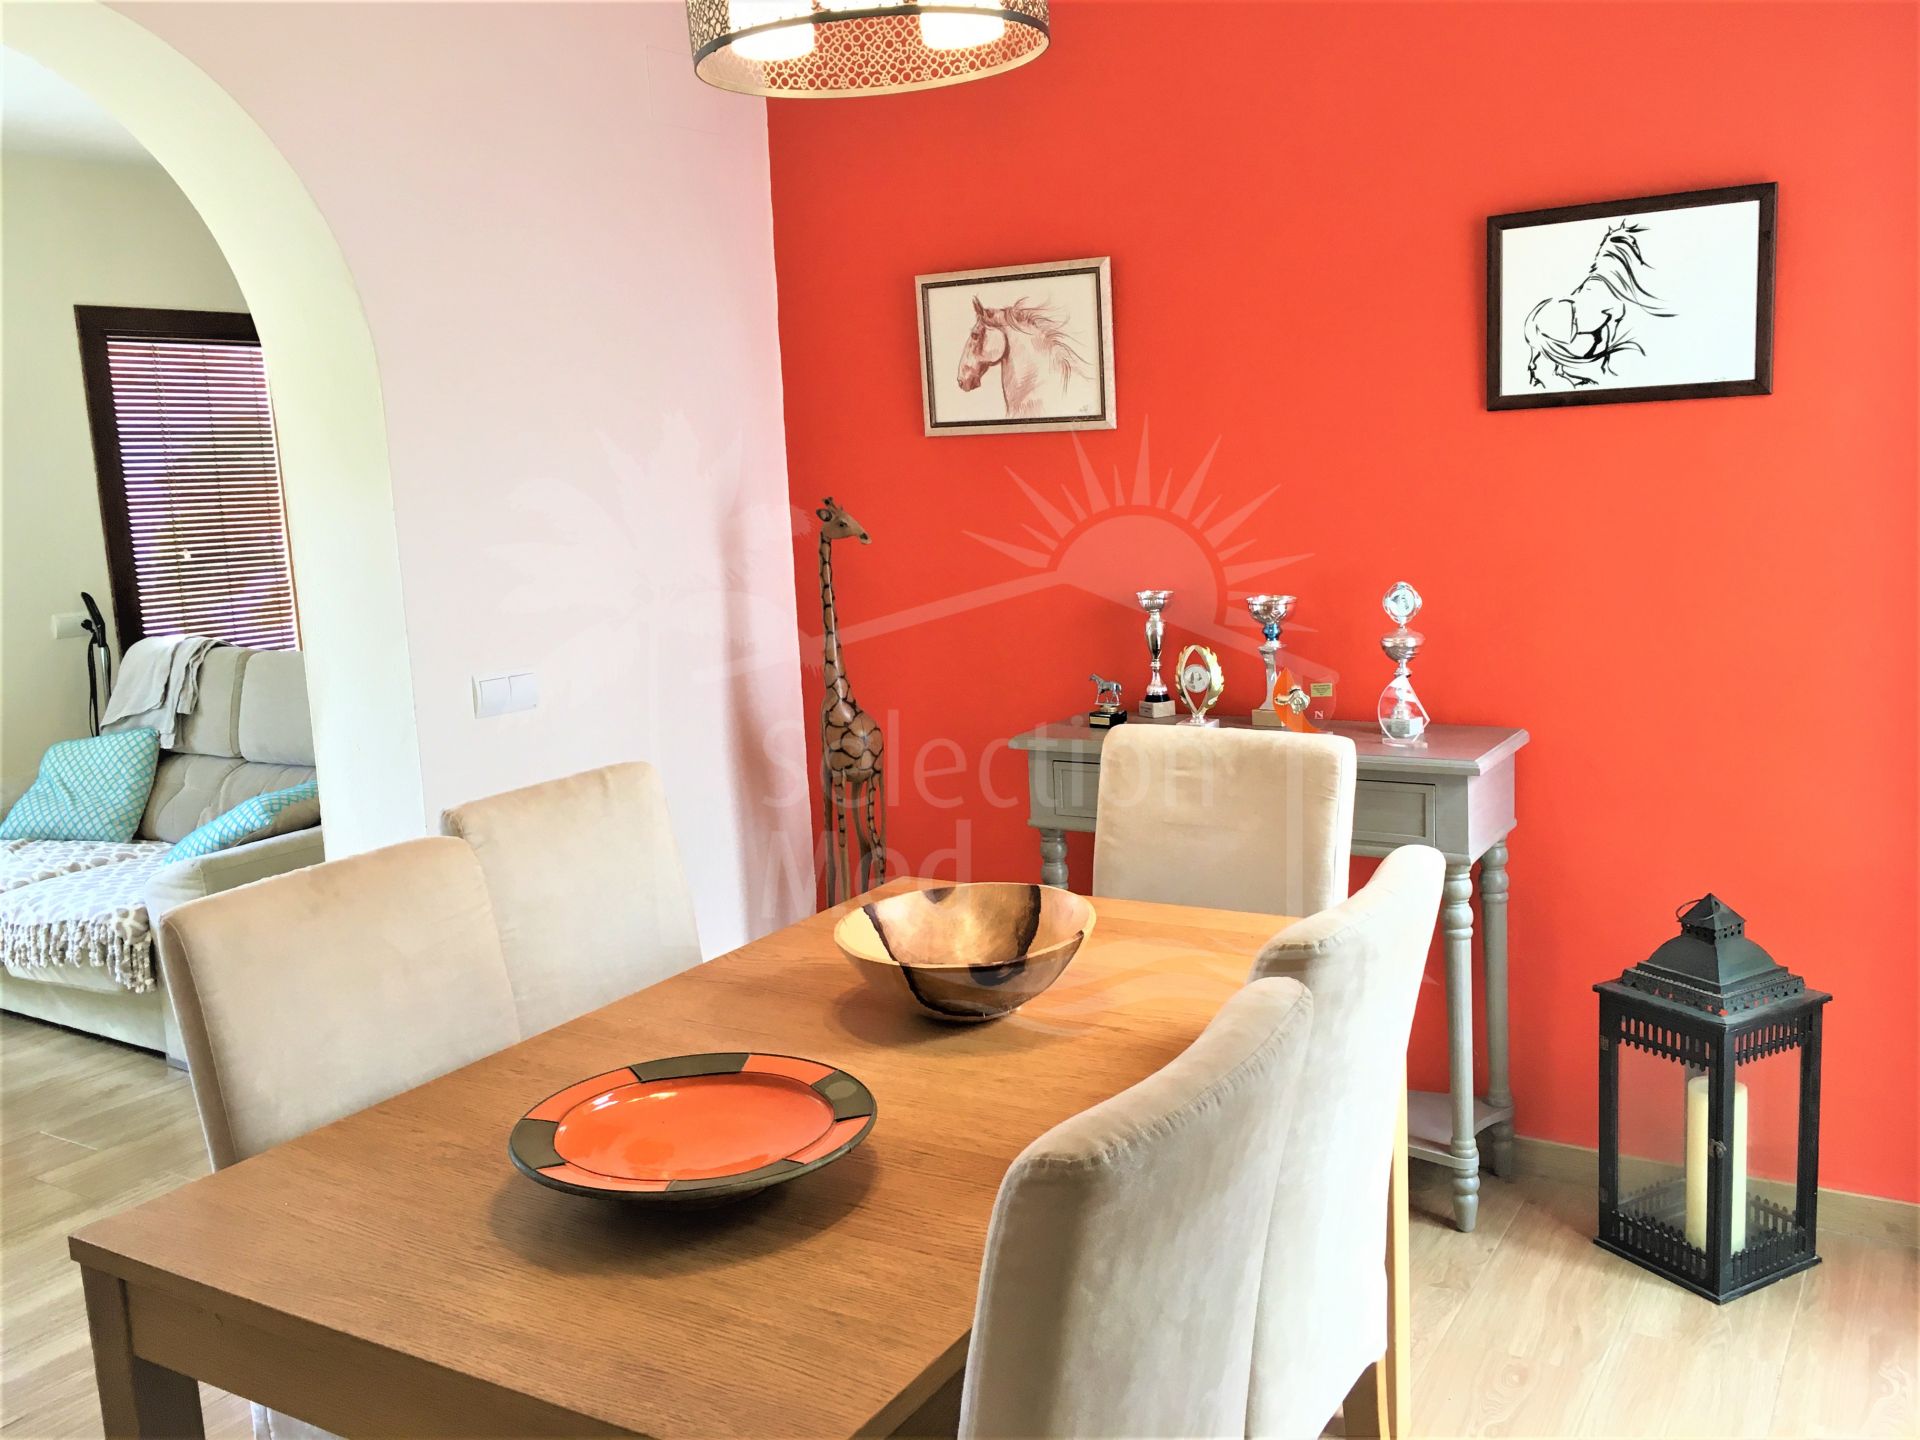 Wonderful Rental Investment Opportunity - Immaculate 3 Bedroom Village House close to Sotogrande.